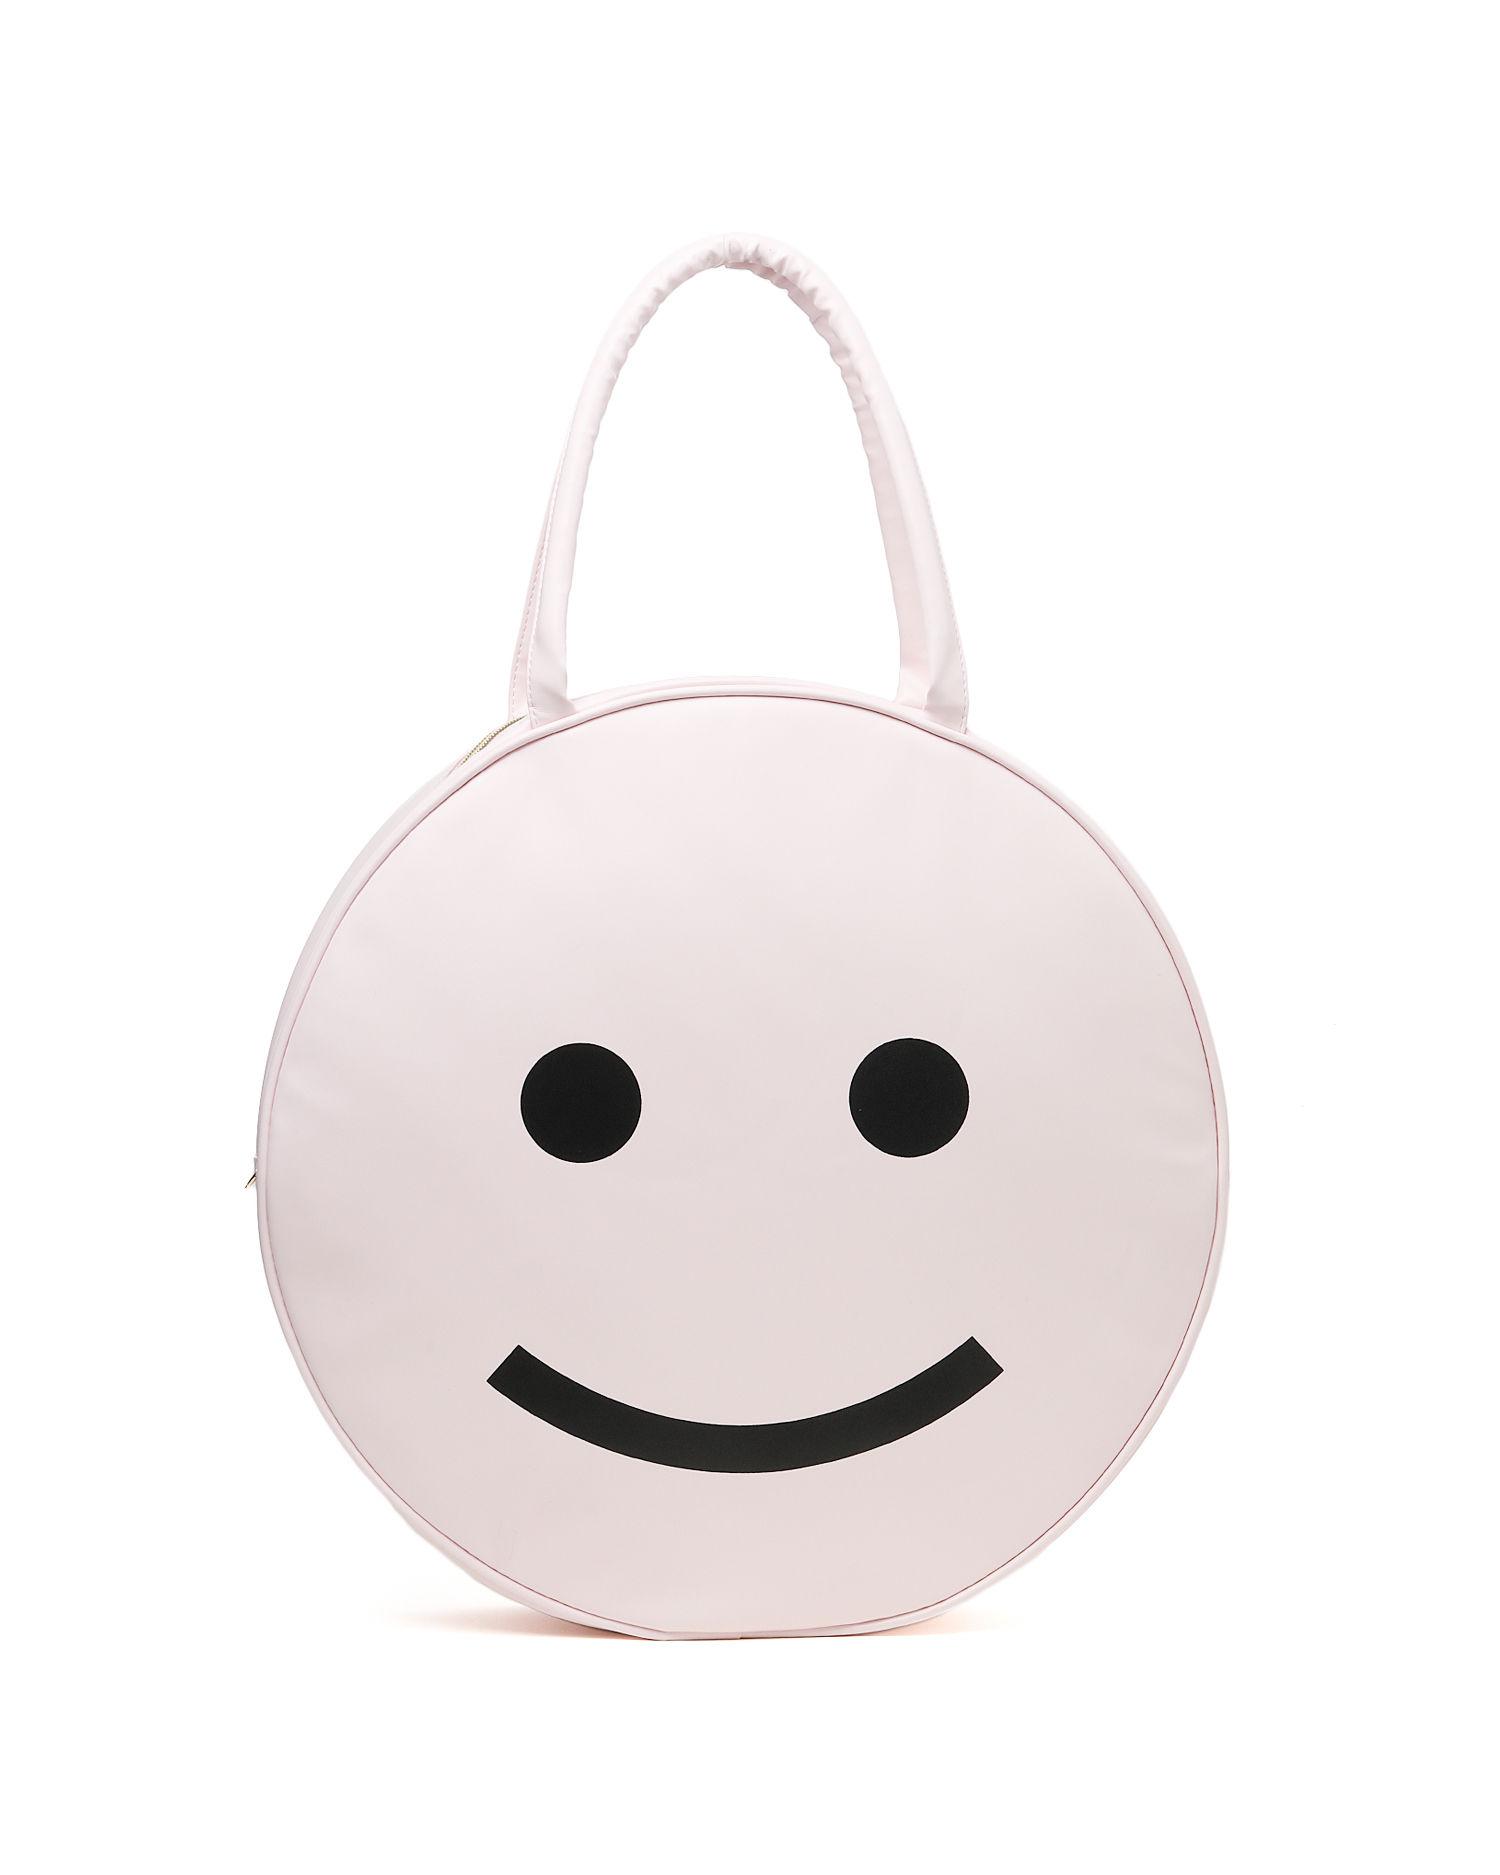 Smiley Face tote bag by BAN.DO